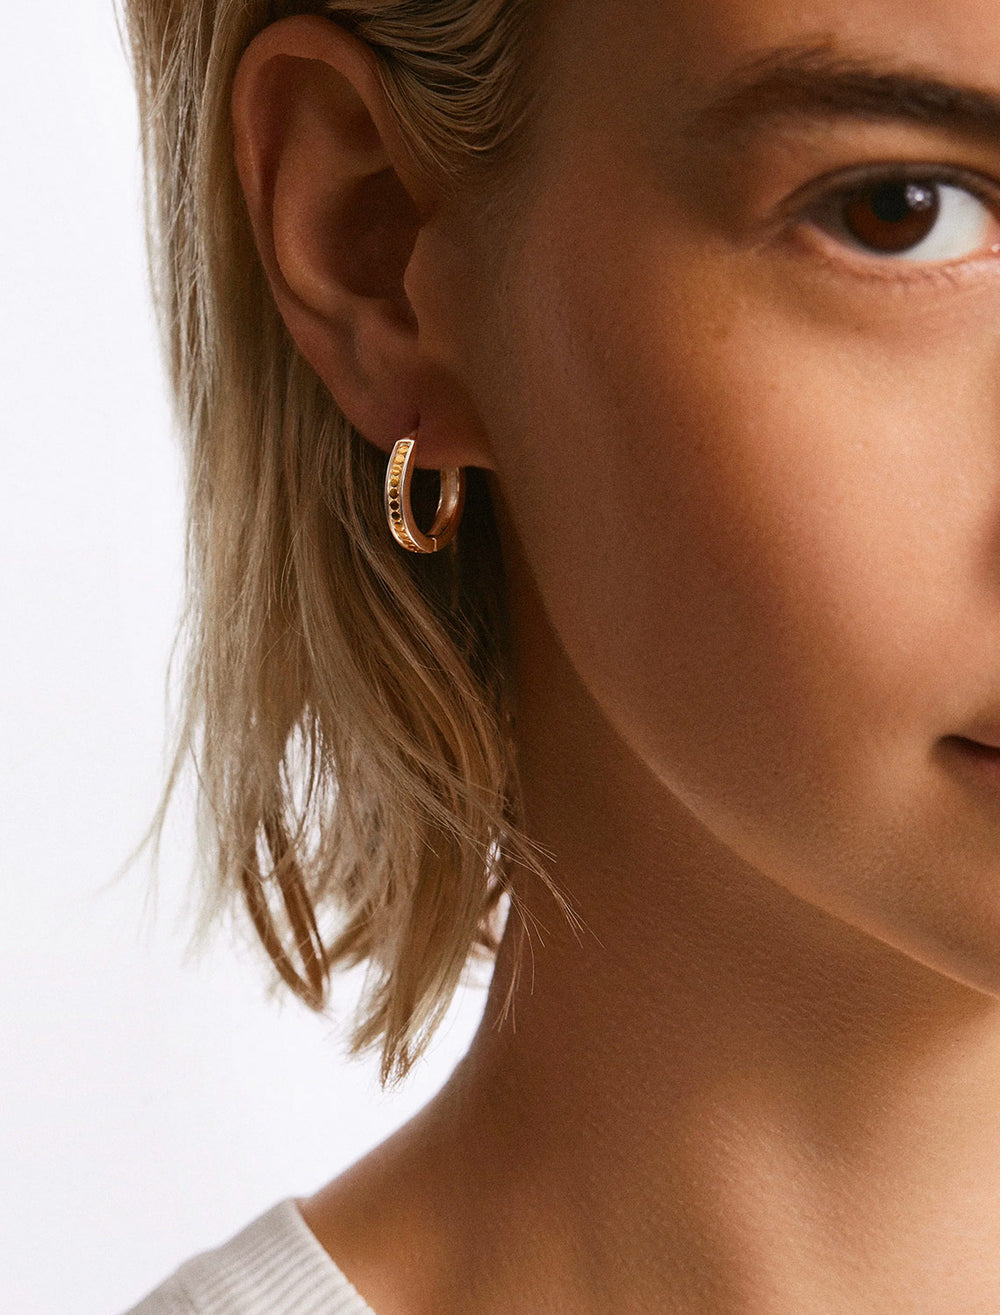 Model wearing Anna Beck's classic small hinge hoops.